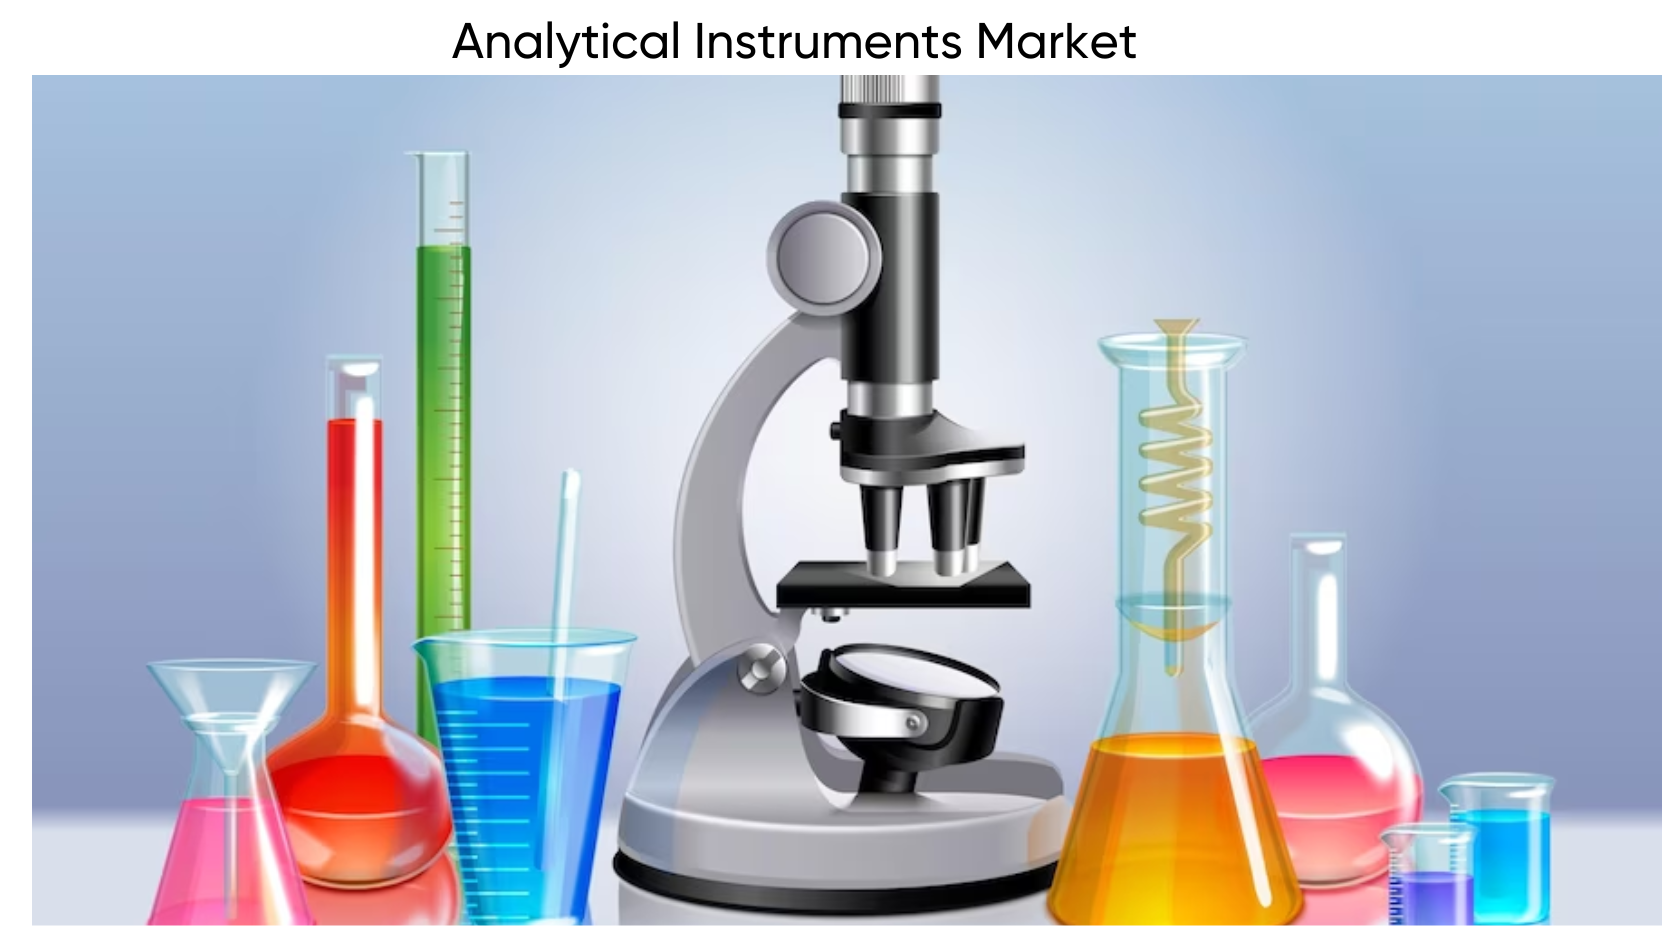 Analytical Instruments Market Revenue to Cross USD 83.1 billion by 2032 | CAGR 6.0%